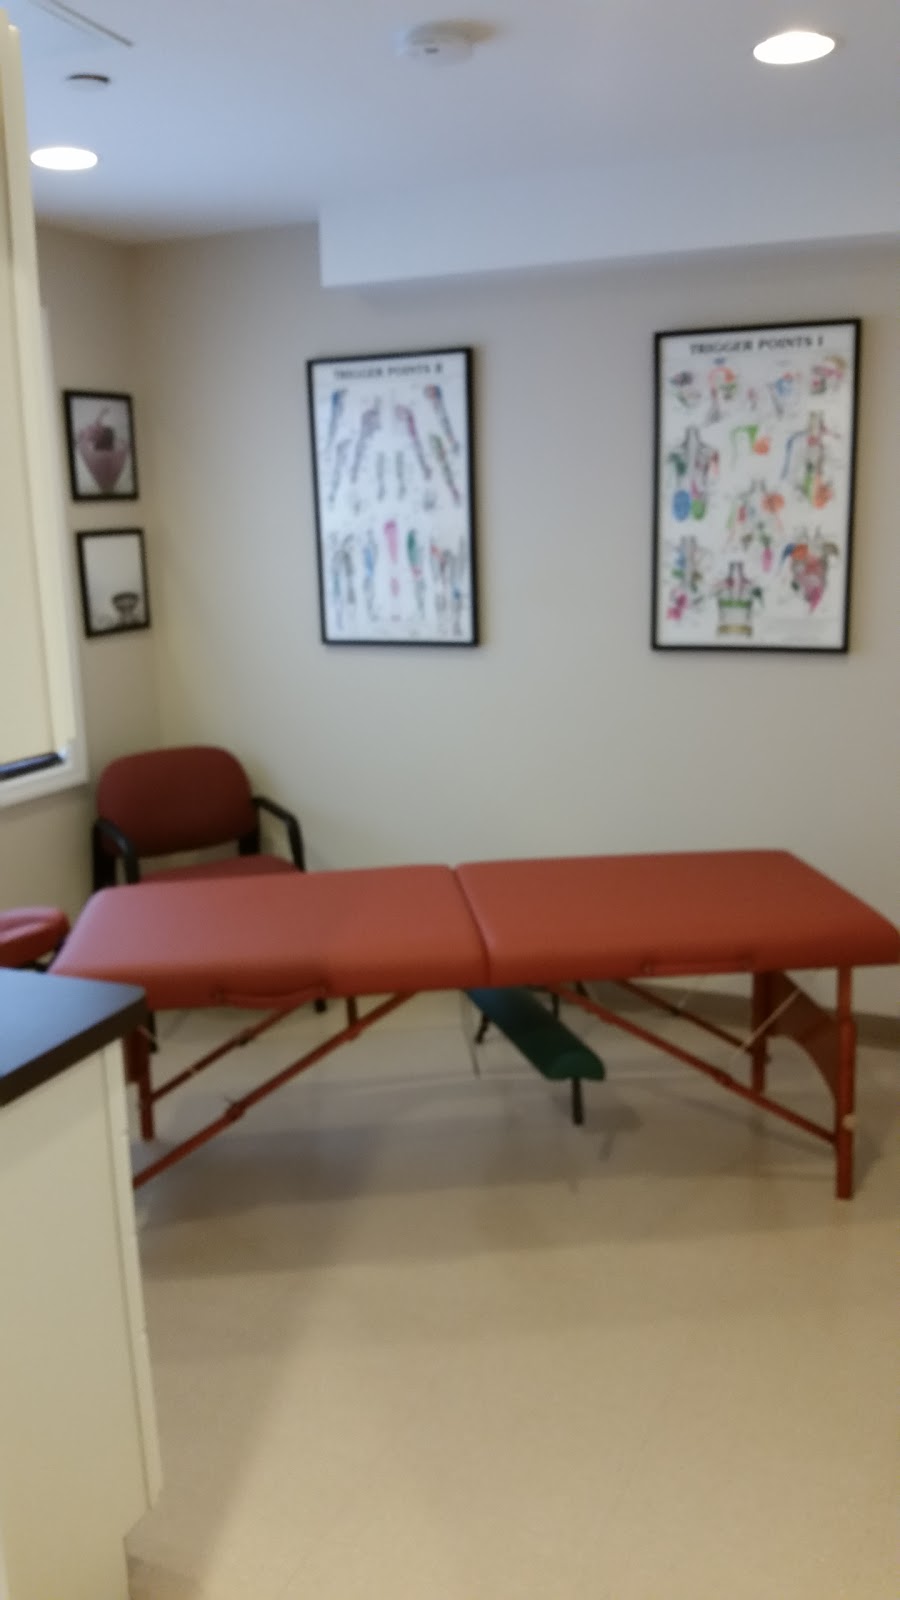 Alliance Physical Therapy PC: Macri, William S. | 5765 Amboy Rd, Staten Island, NY 10309 | Phone: (718) 227-5757